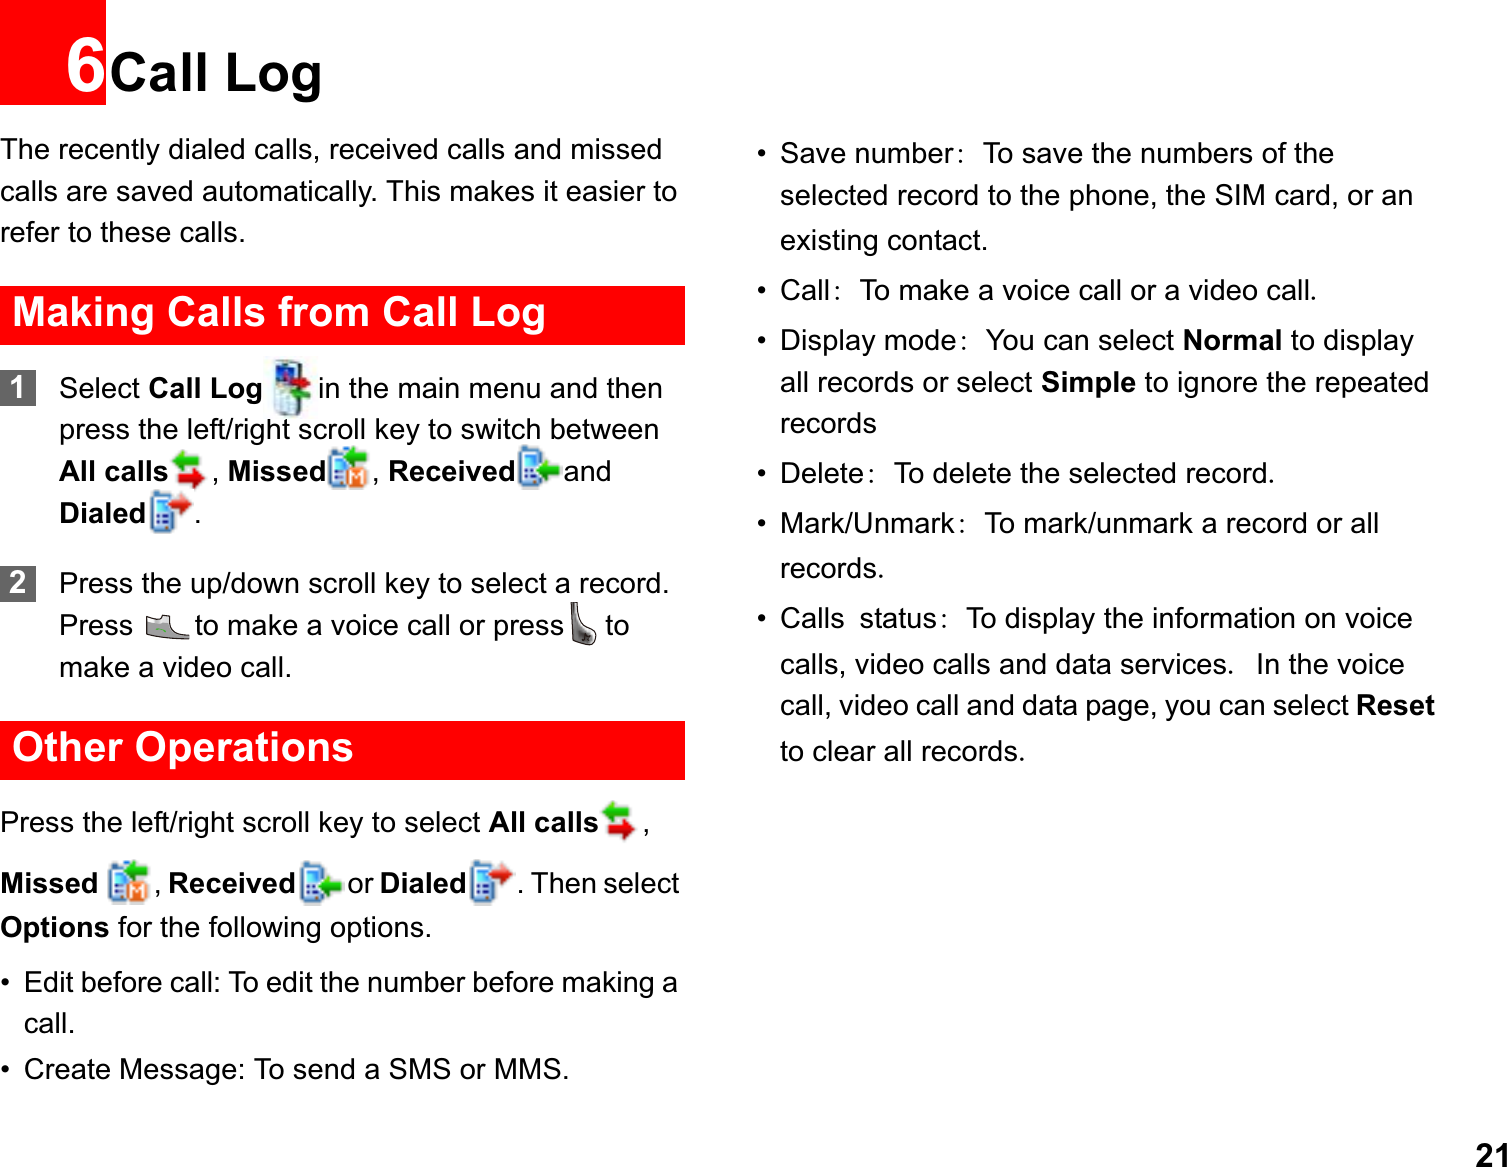 216Call LogThe recently dialed calls, received calls and missed calls are saved automatically. This makes it easier to refer to these calls.Making Calls from Call Log1Select Call Log in the main menu and then press the left/right scroll key to switch between All calls ,Missed ,Received and Dialed .2Press the up/down scroll key to select a record. Press  to make a voice call or press to make a video call.Other OperationsPress the left/right scroll key to select All calls ,Missed  ,Received or Dialed . Then select Options for the following options.• Edit before call: To edit the number before making a call.• Create Message: To send a SMS or MMS.• Save numberTo save the numbers of the selected record to the phone, the SIM card, or an existing contact.• CallTo make a voice call or a video call• Display modeYou can select Normal to display all records or select Simple to ignore the repeated records• DeleteTo delete the selected record• Mark/UnmarkTo mark/unmark a record or all records• CallsstatusTo display the information on voice calls, video calls and data servicesIn the voice call, video call and data page, you can select Resetto clear all records